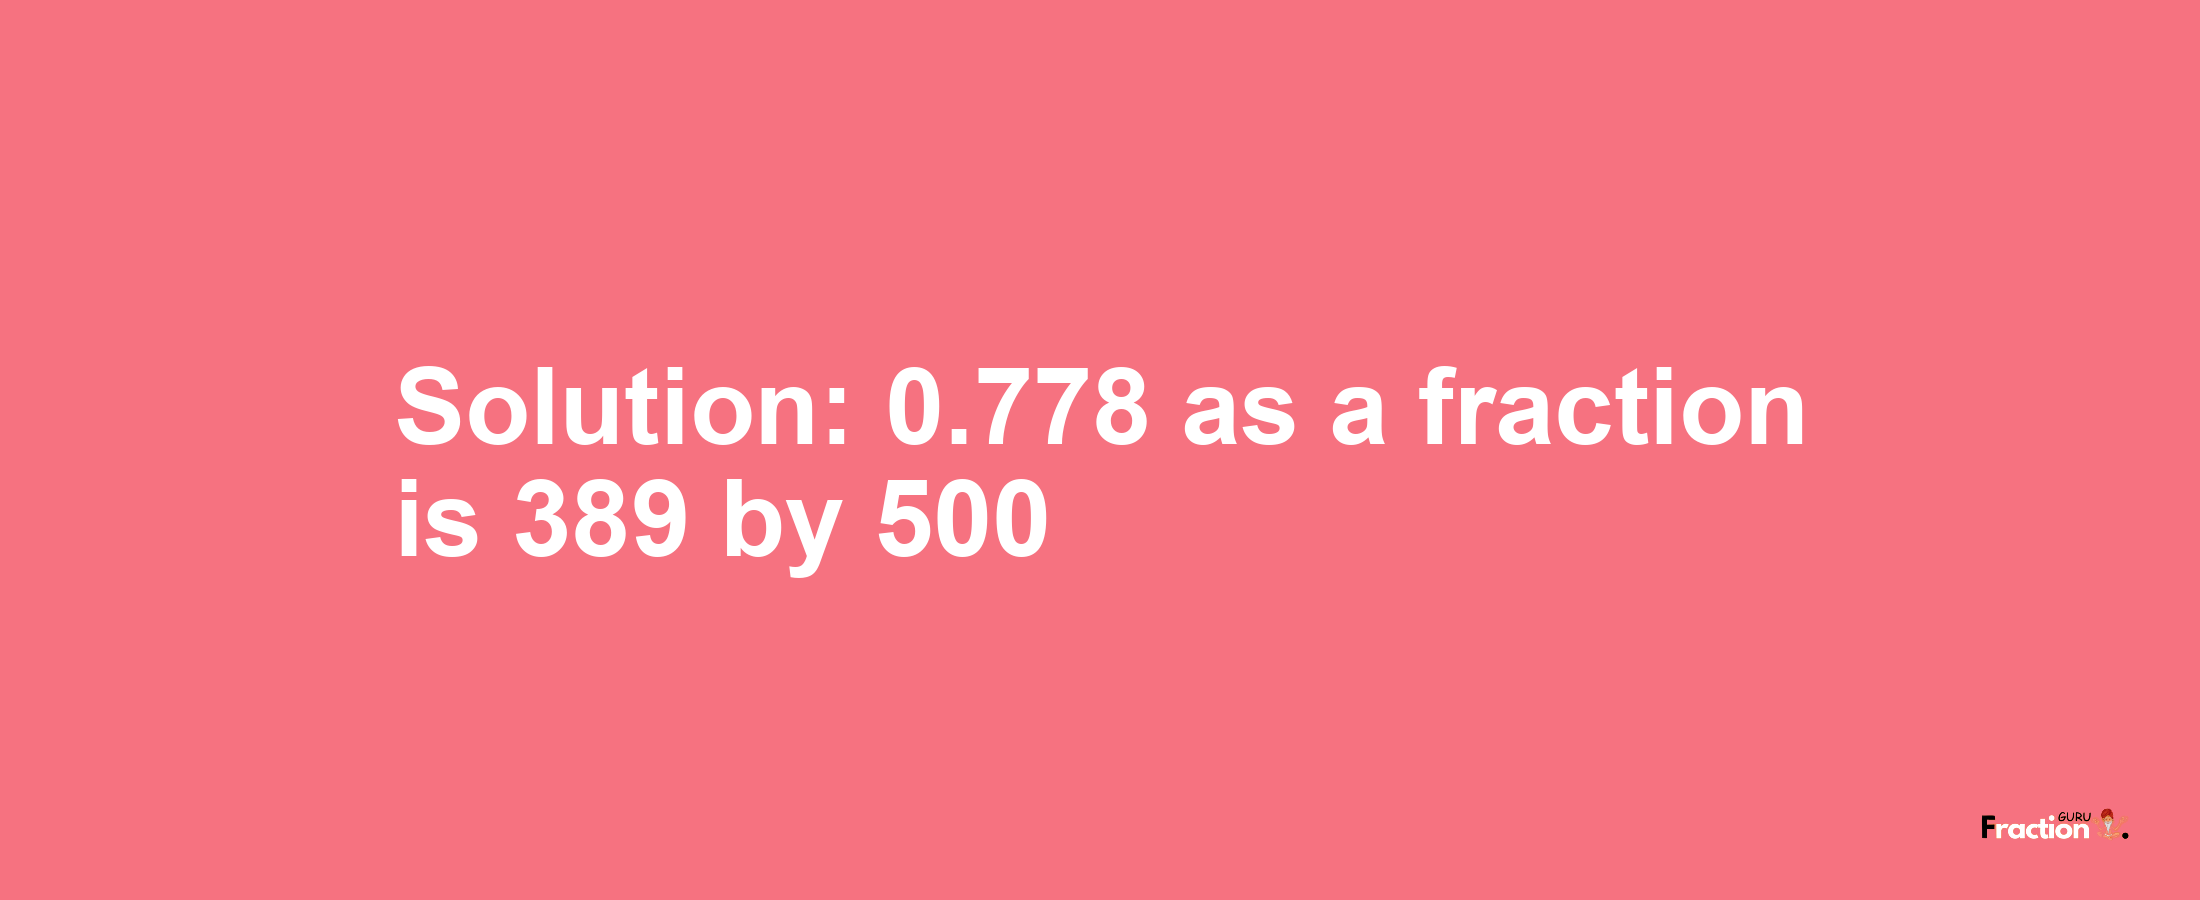 Solution:0.778 as a fraction is 389/500